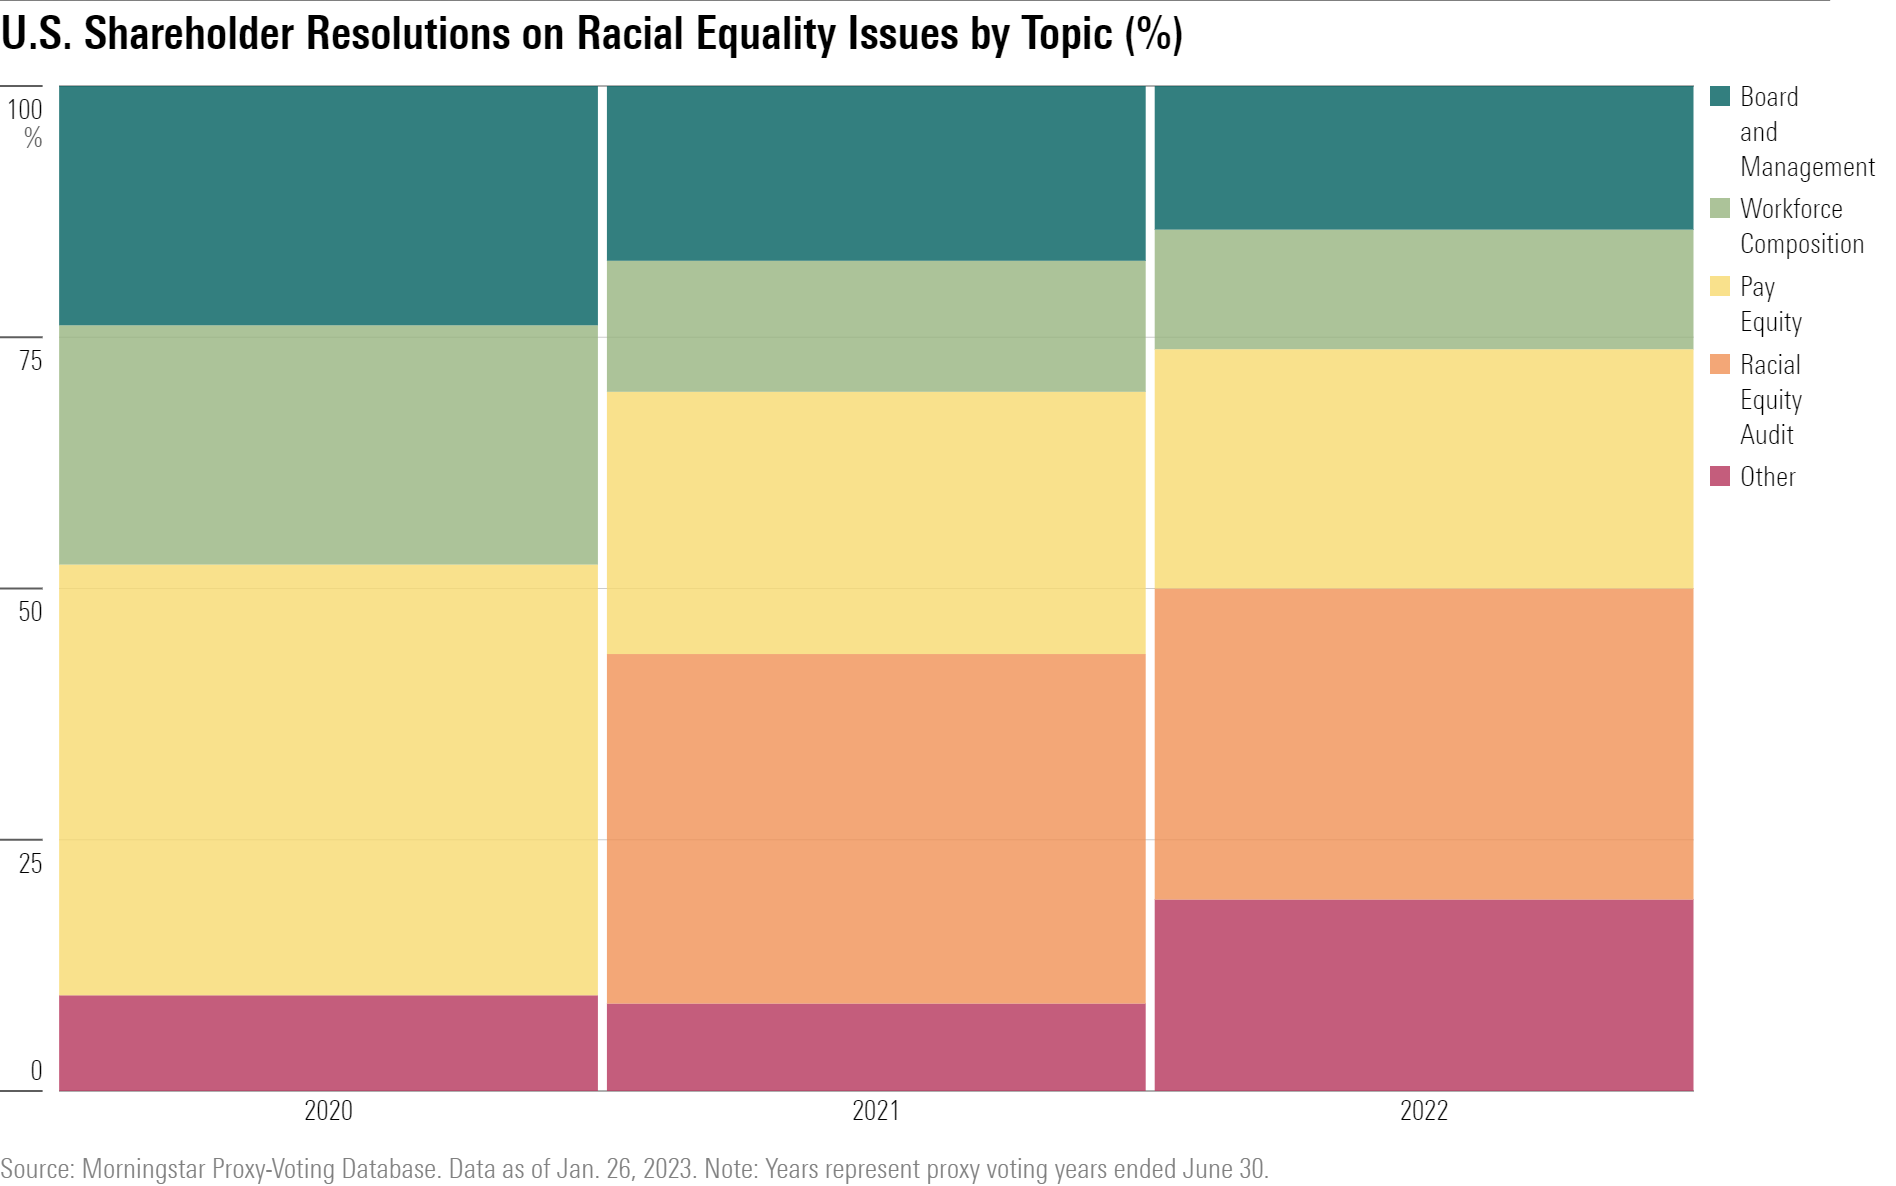 A bar chart of U.S. shareholder resolutions on racial equality issues by topic.